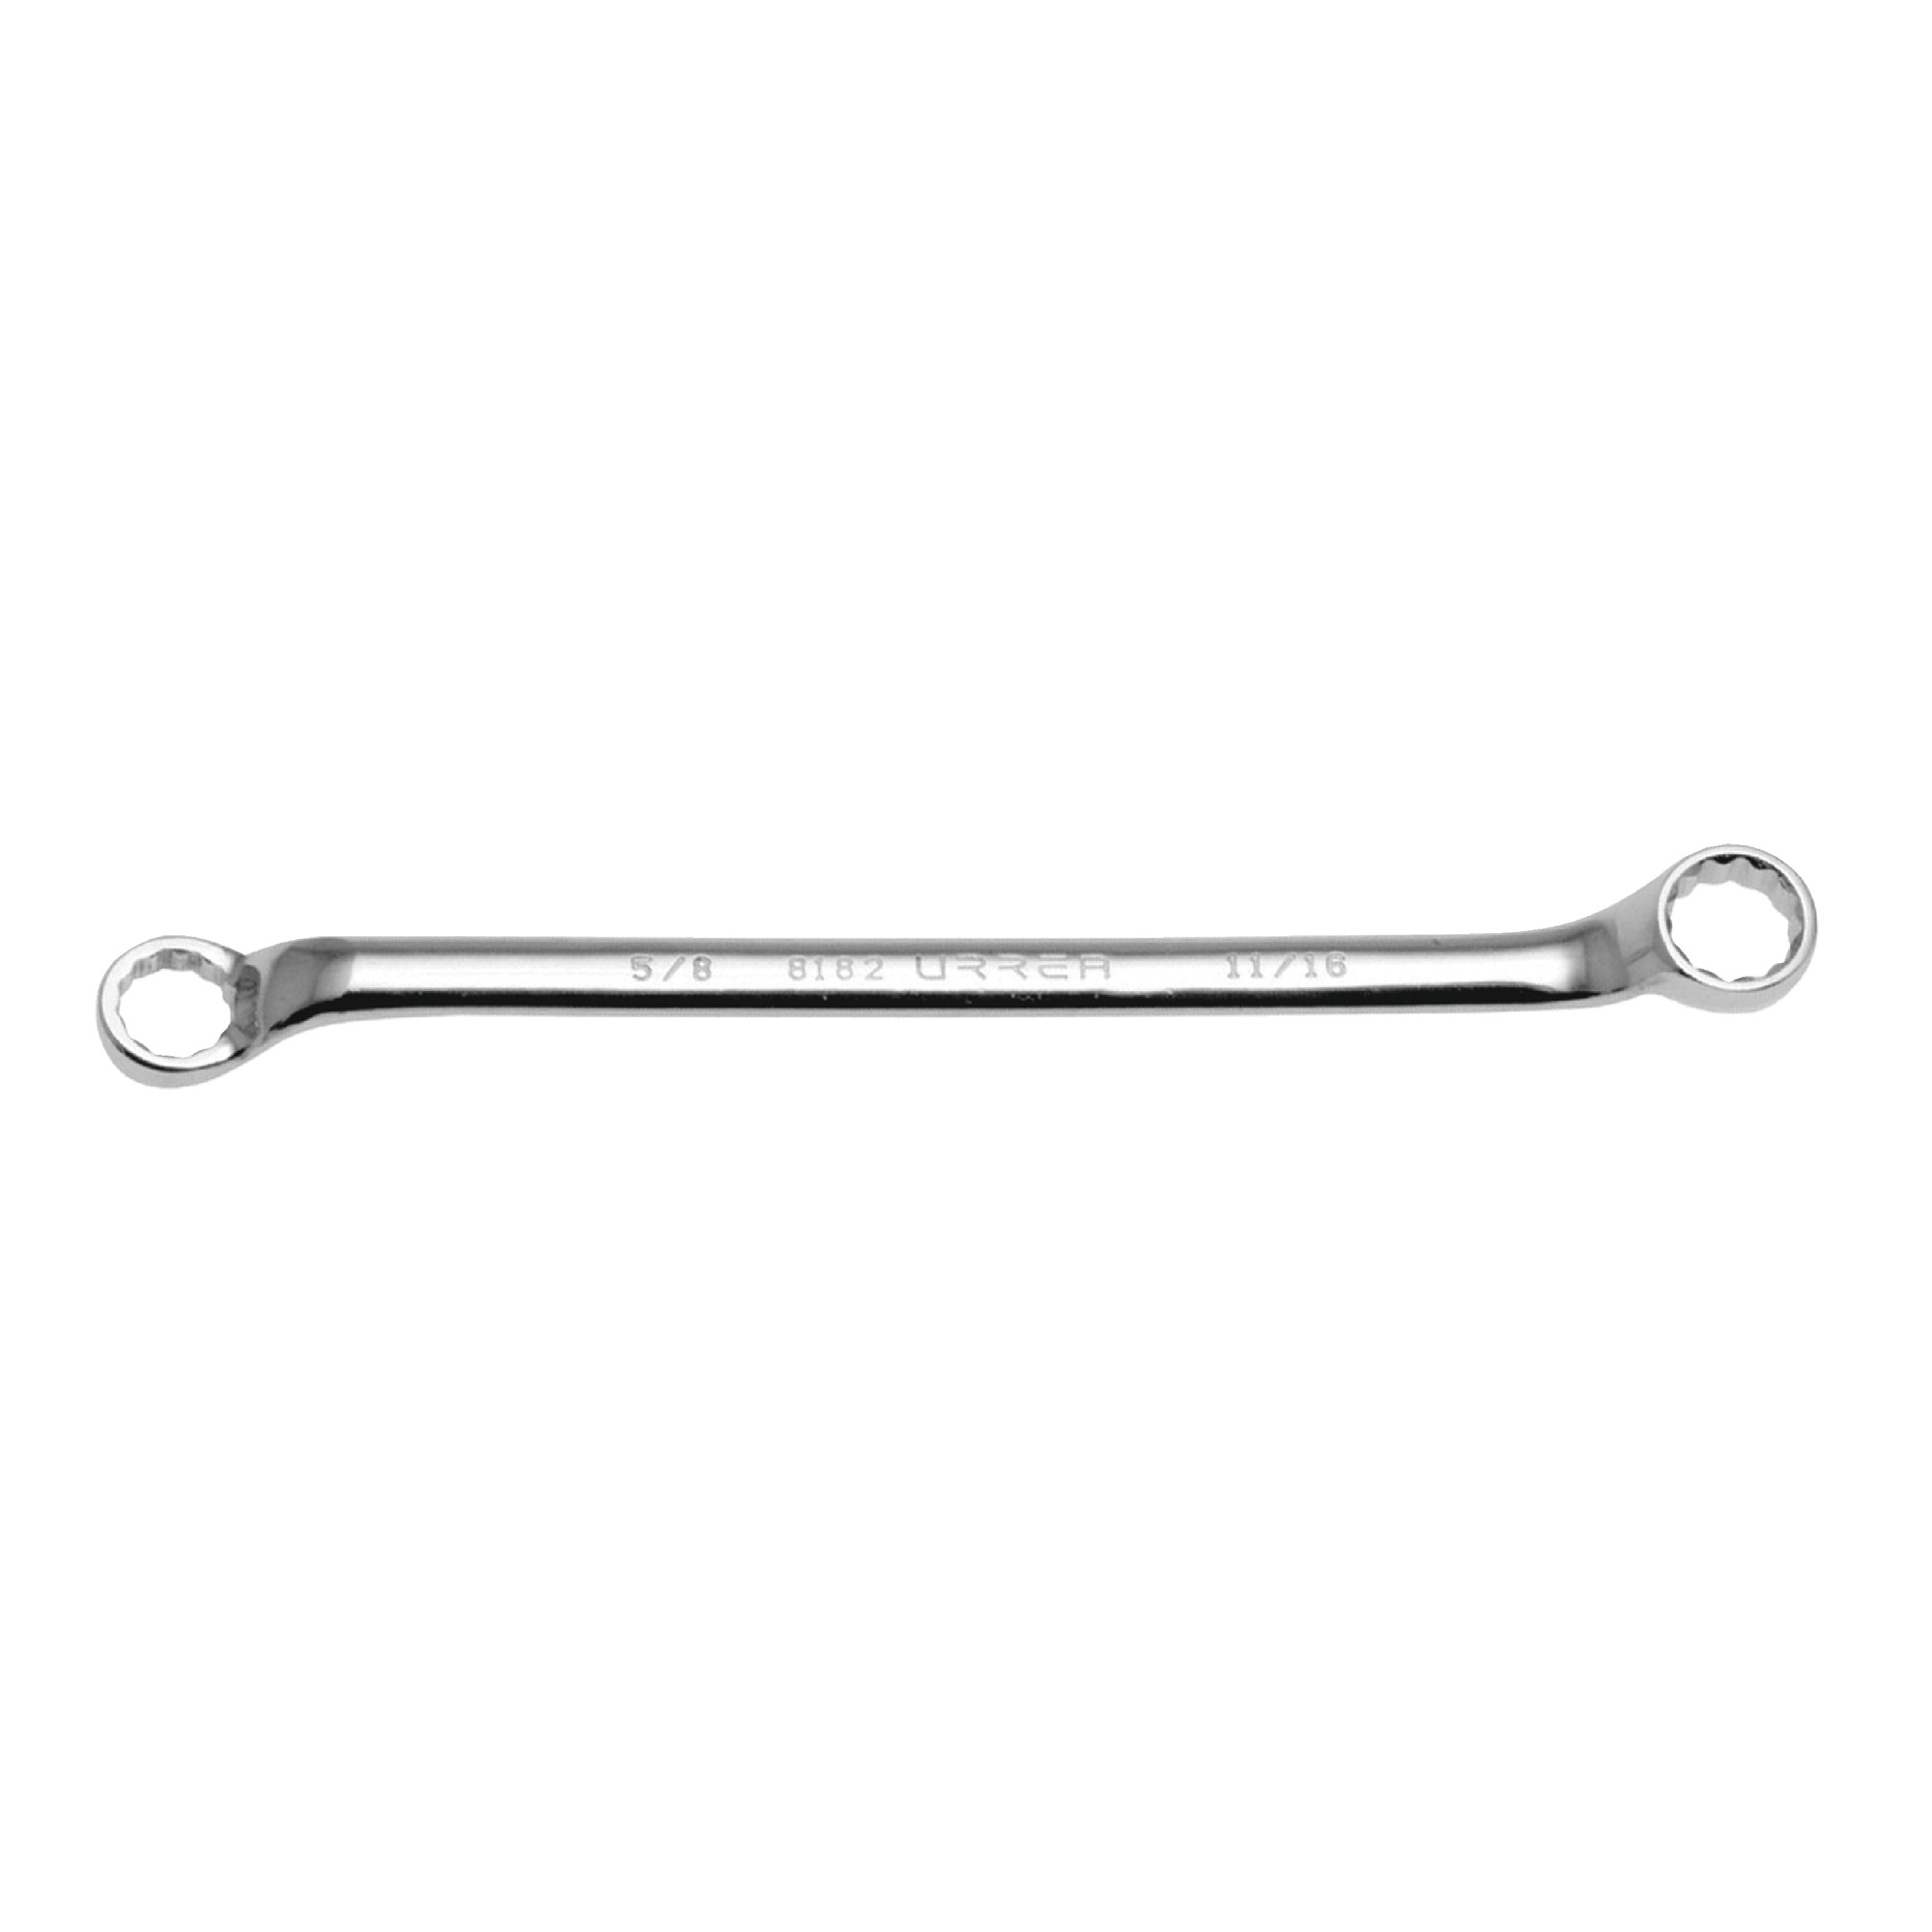 81213 12mm x 13mm Chrome Finish 12 Point Box End Wrench